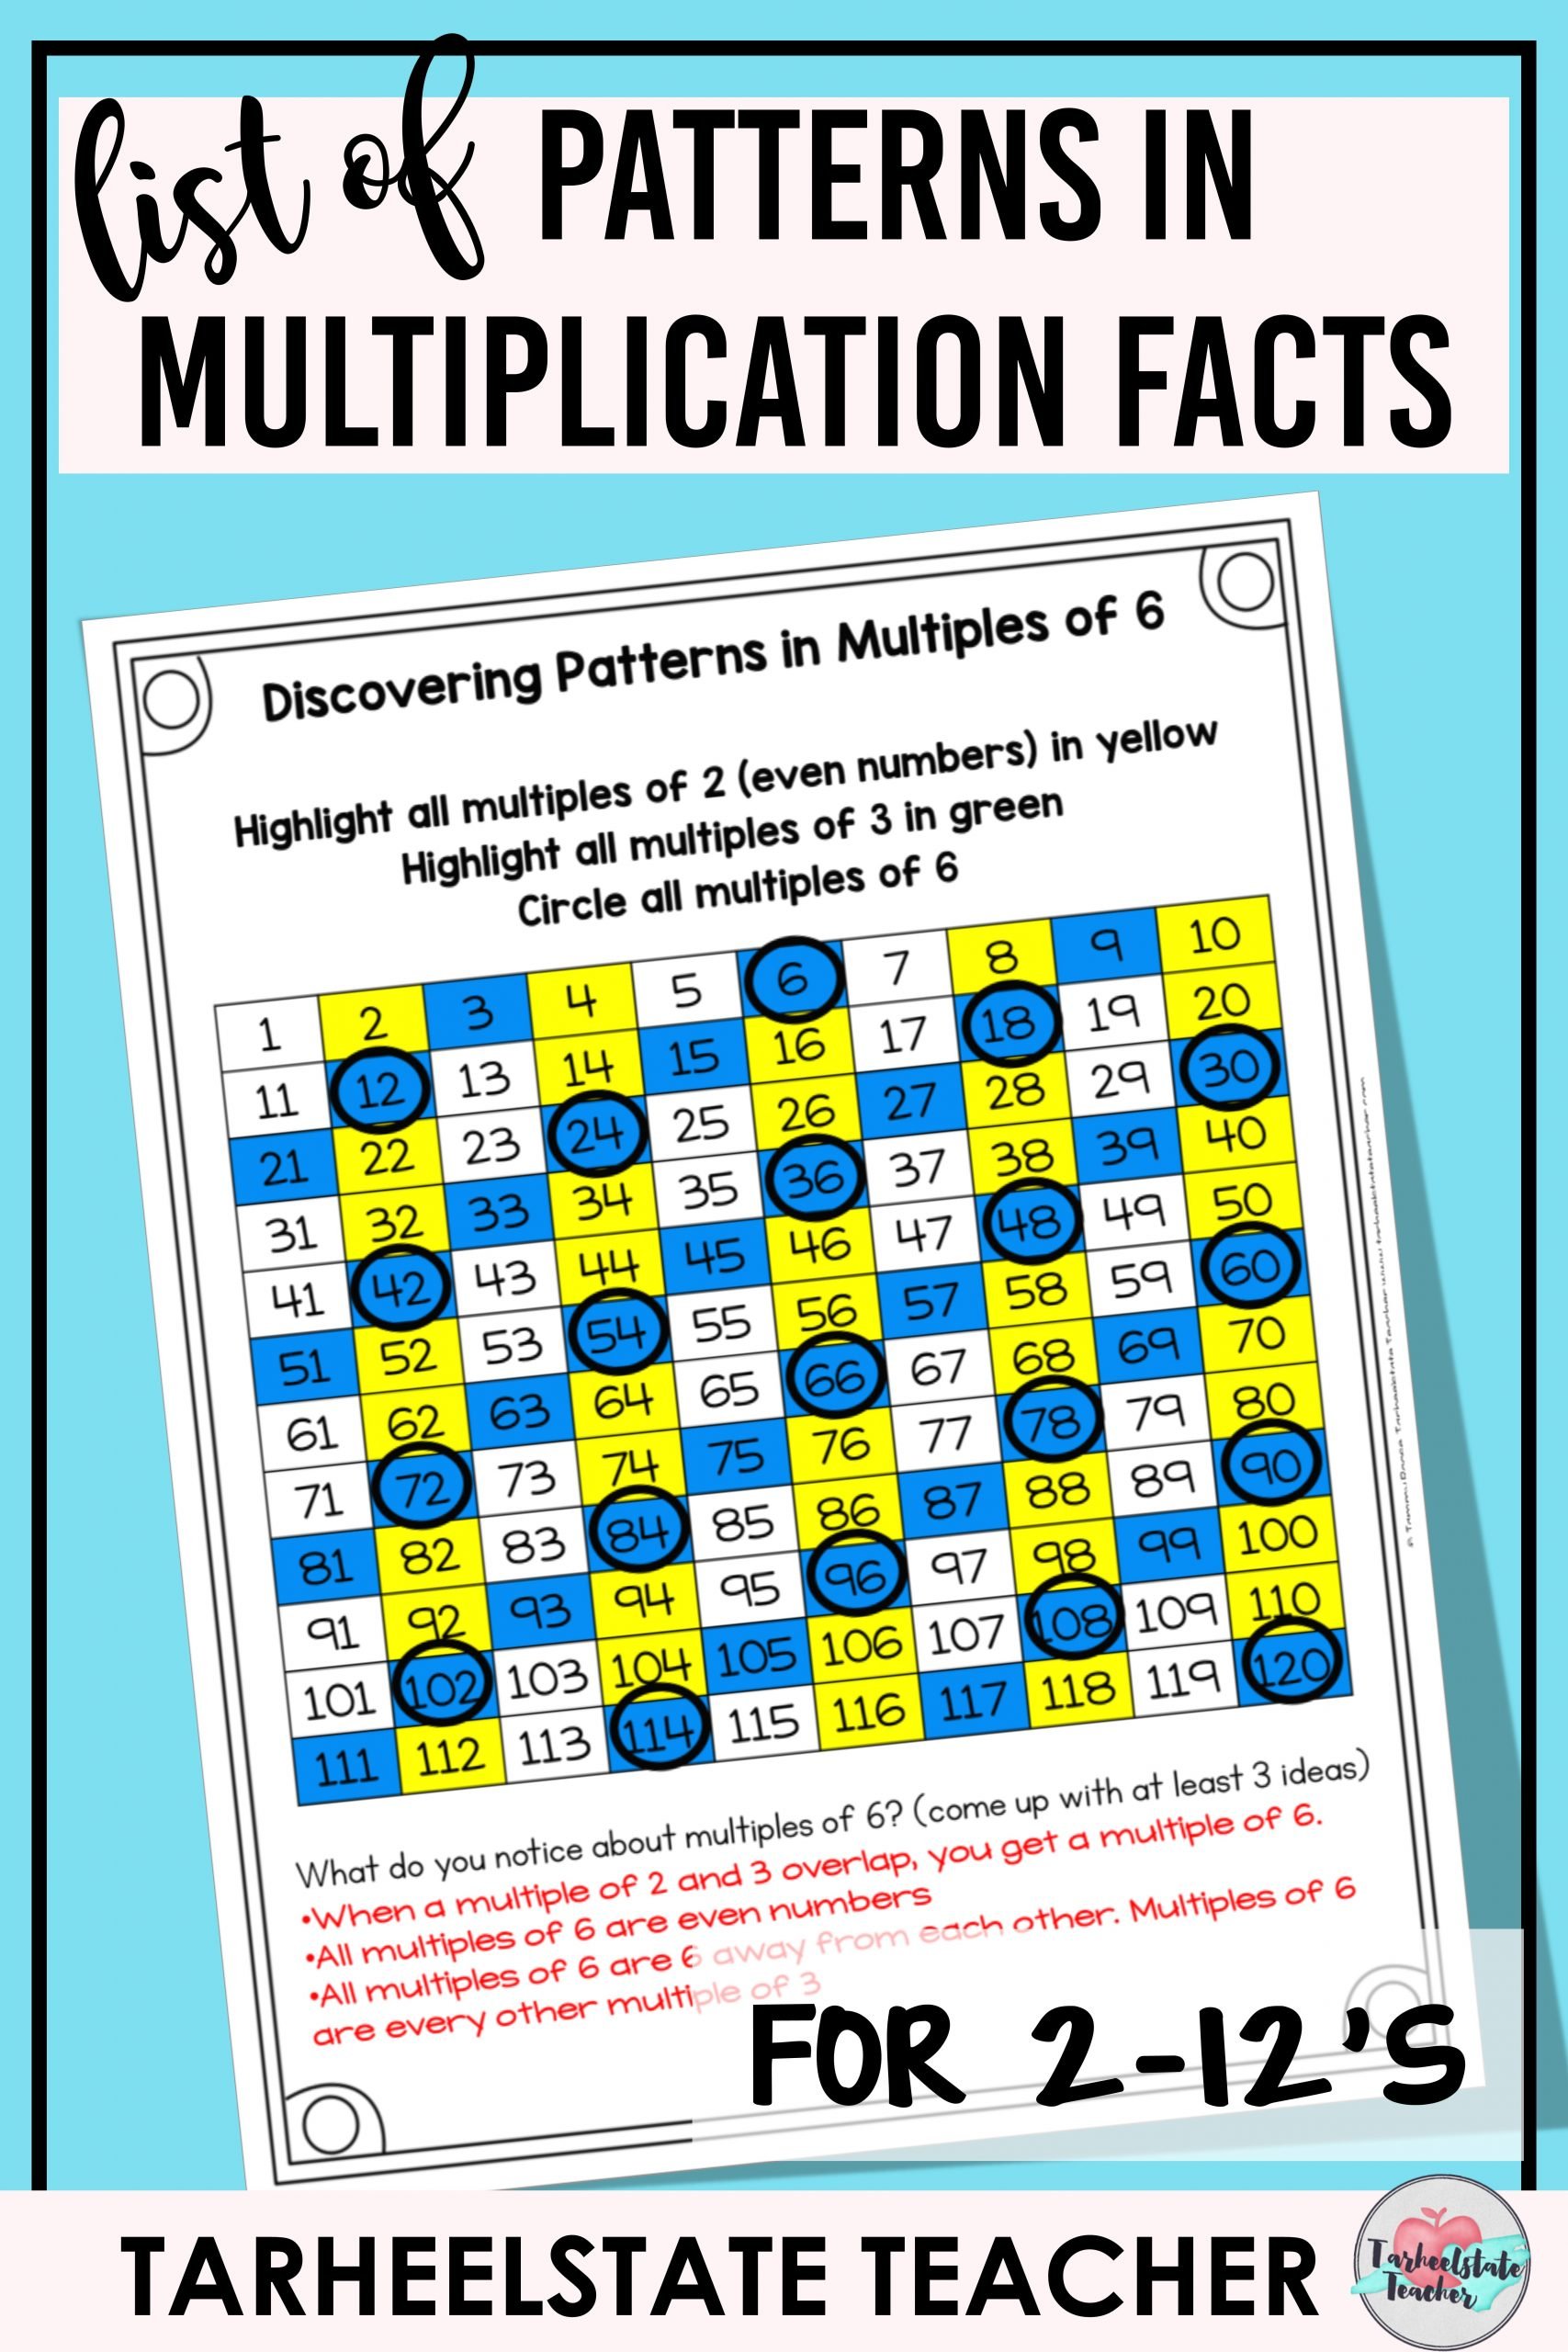 Multiplication Patterns in Times Tables  Tarheelstate ...